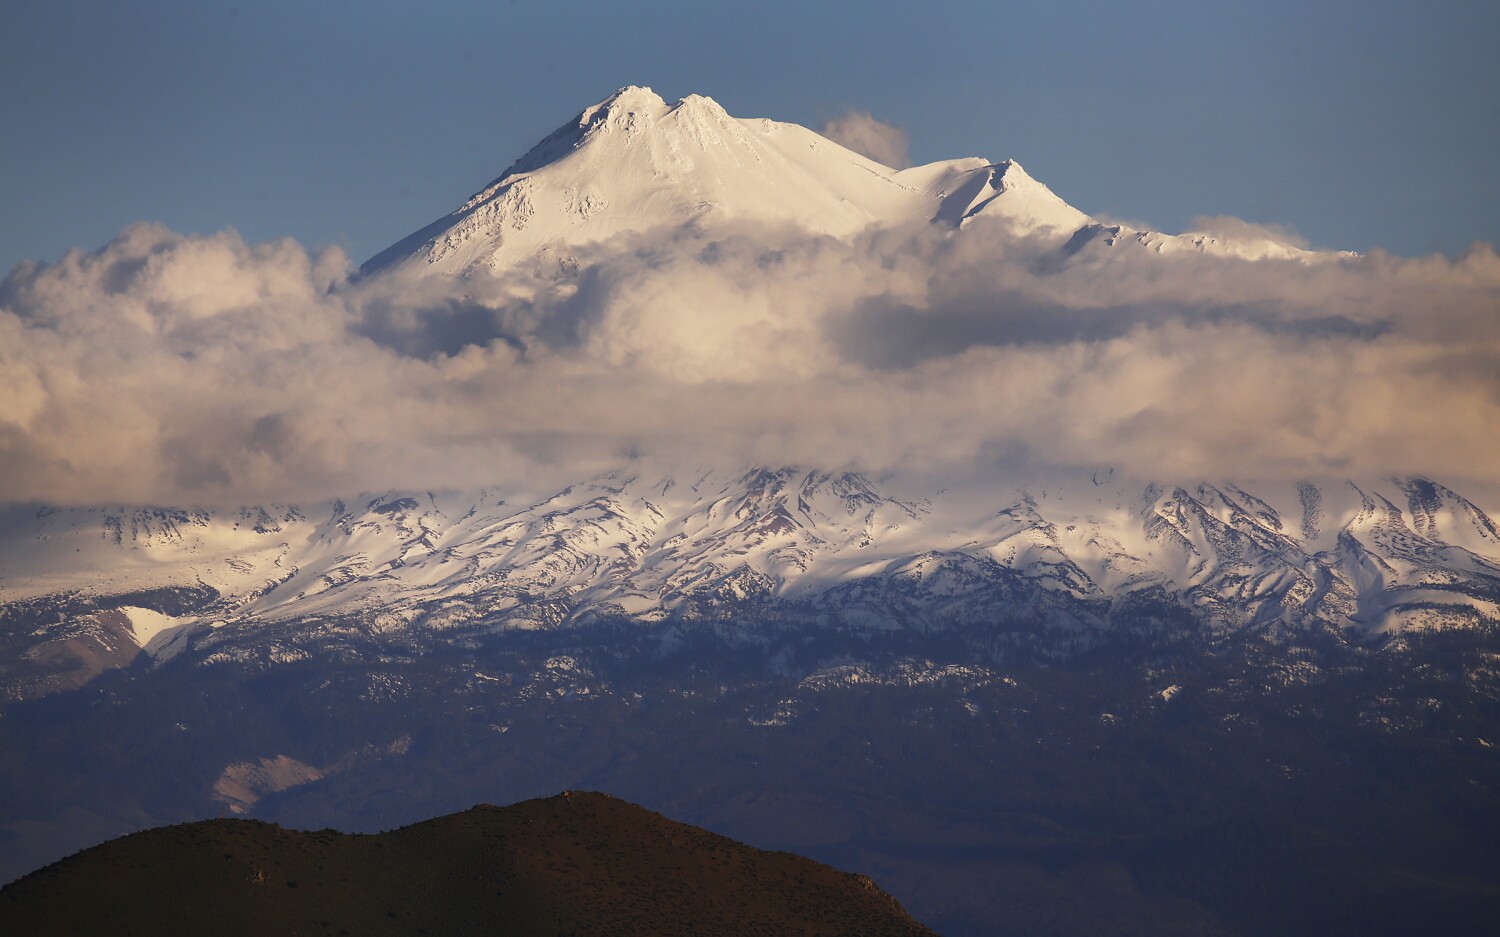 Series of climbing accidents on Mt. Shasta leaves 1 dead, 5 injured